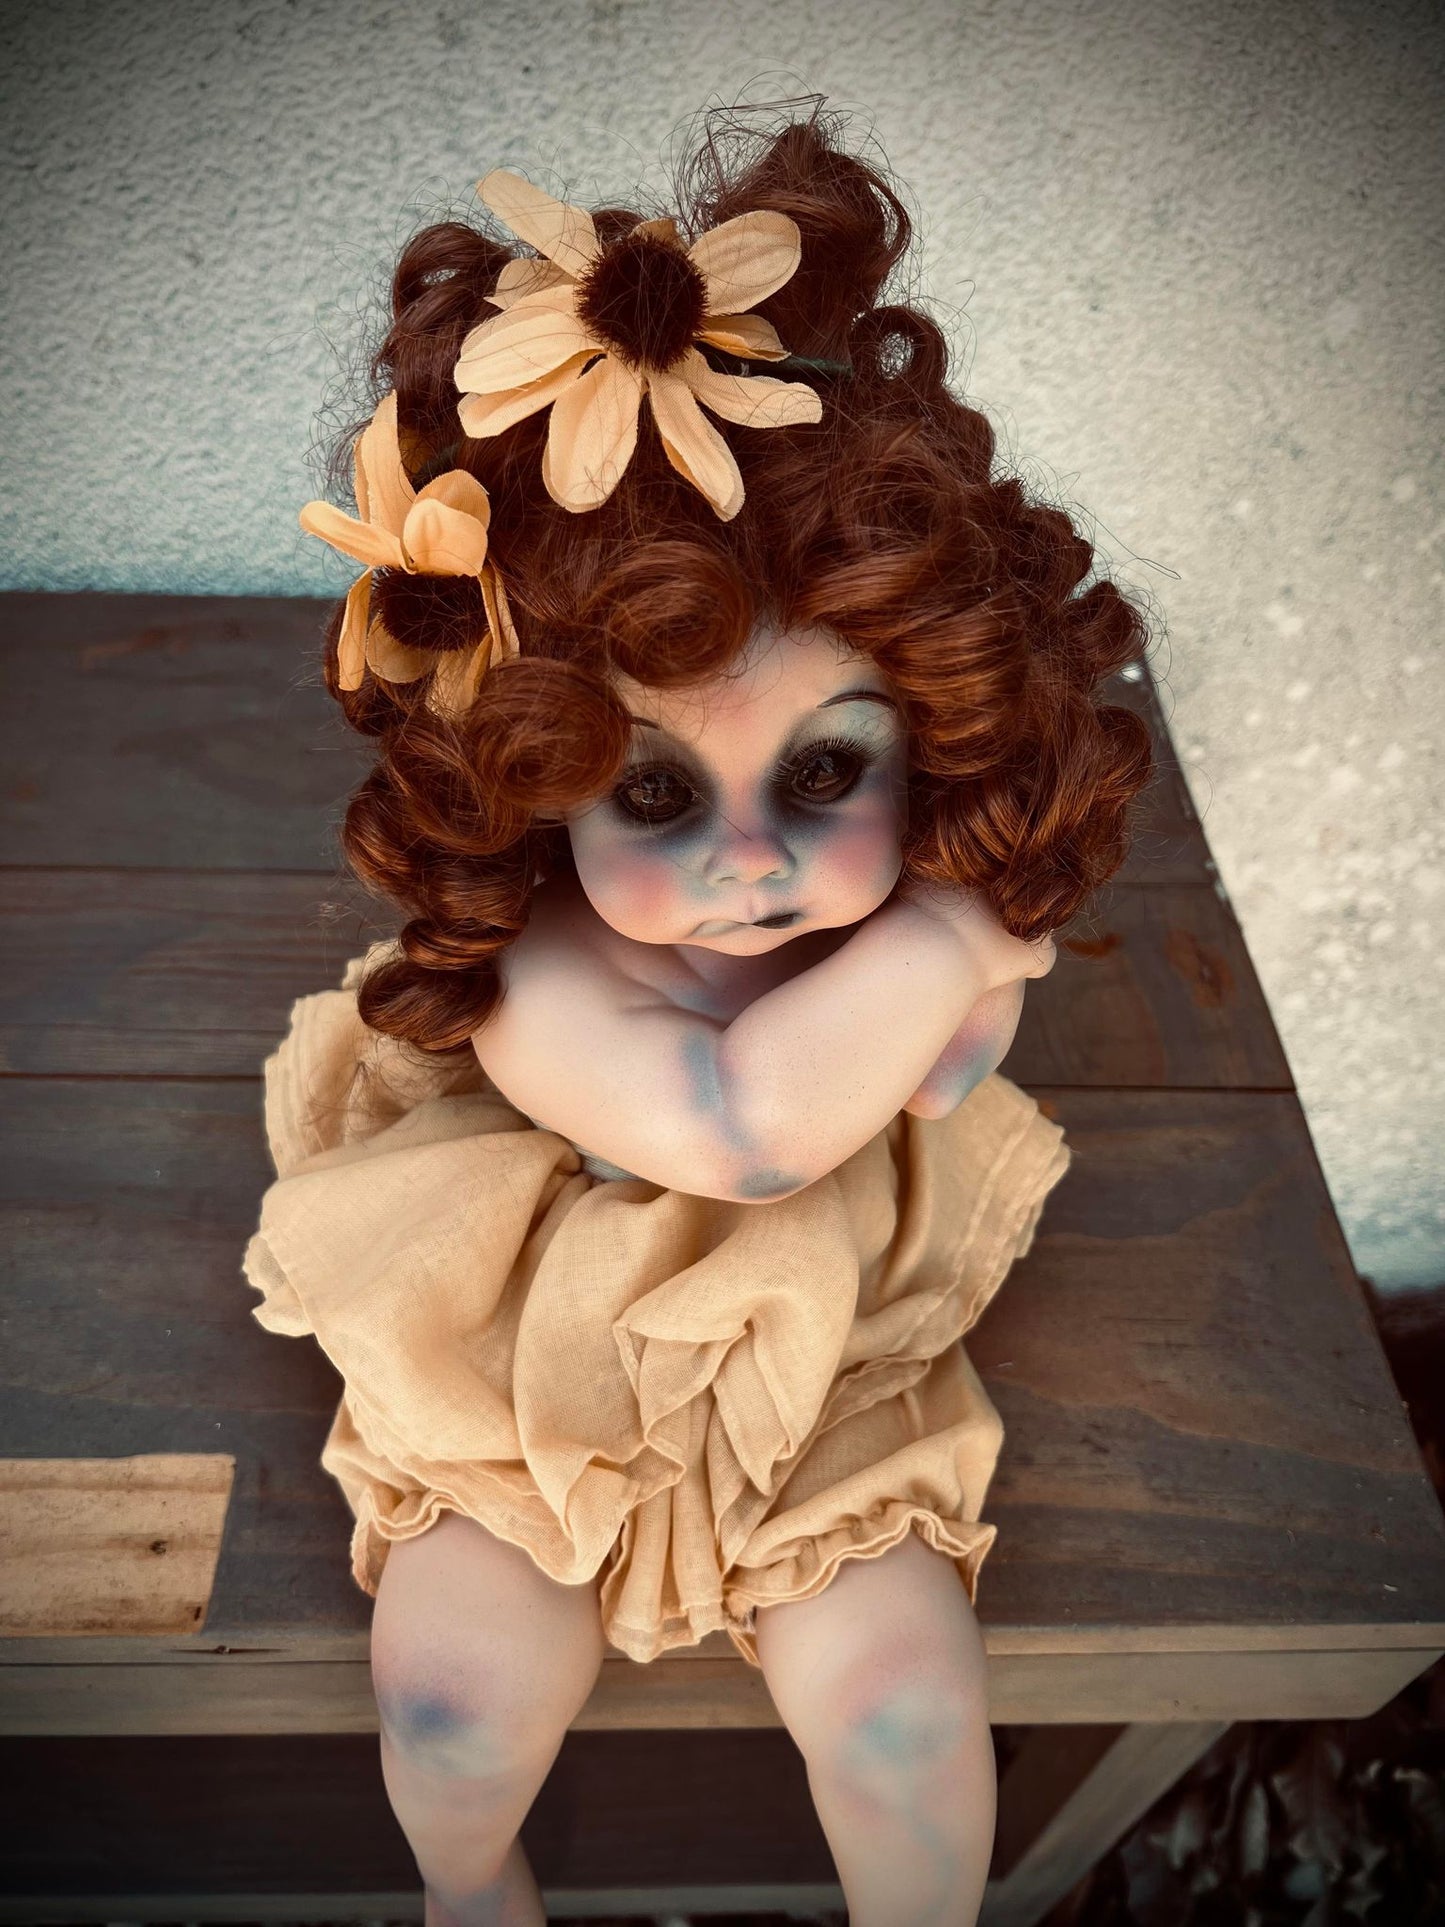 Meet Millie 17" Doll Porcelain Zombie Undead Witchy Creepy Haunted Spirit Infected Scary Spooky Possessed Positive Oddity Gift Idea